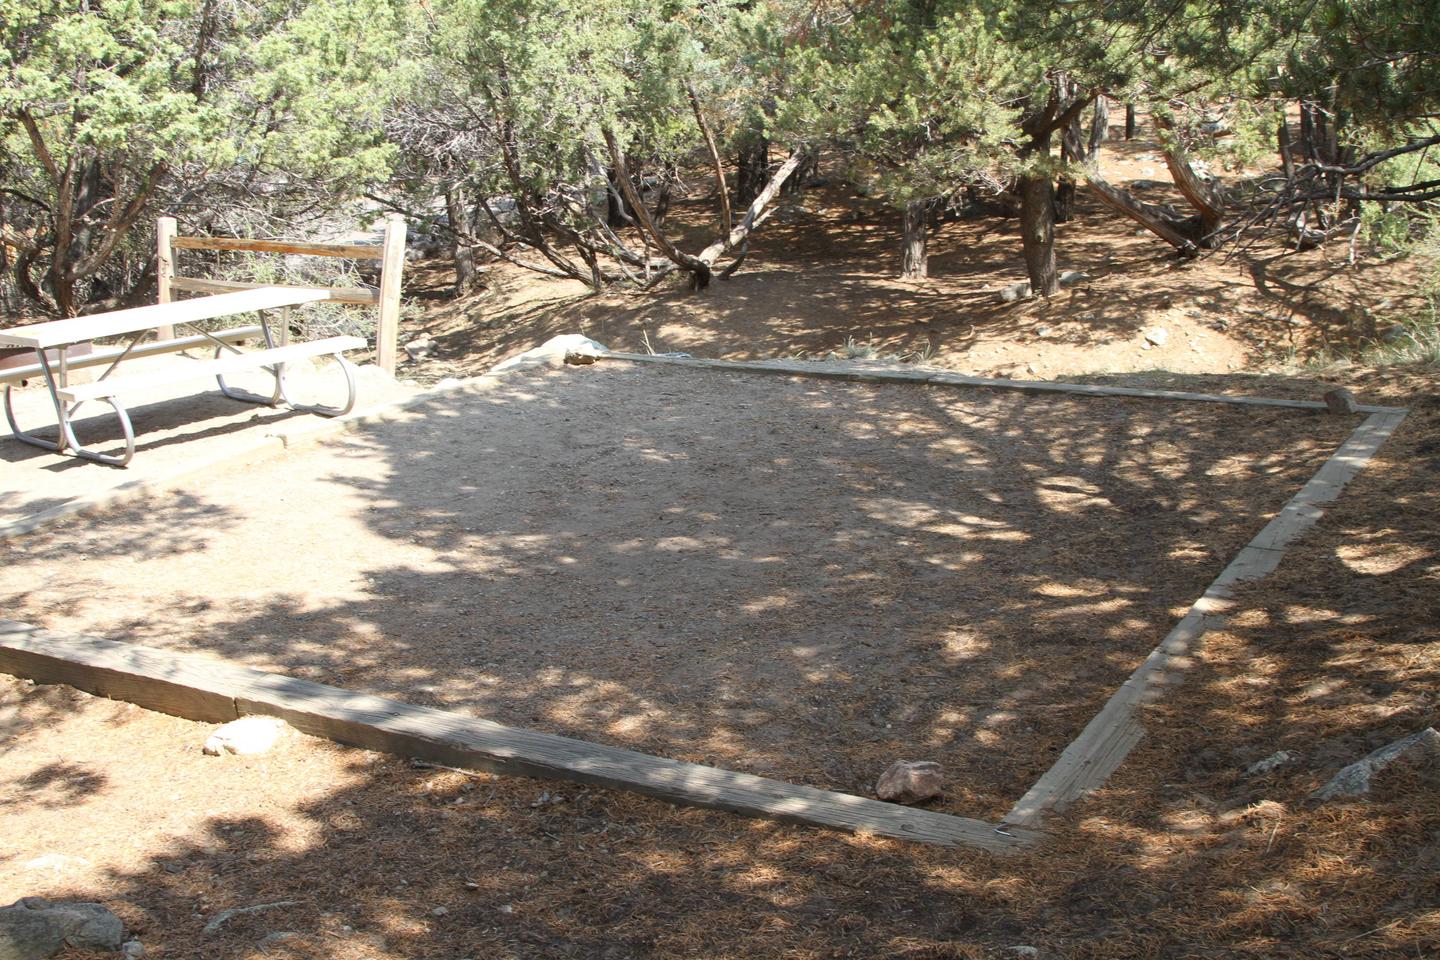 View of Site #13 designated tent pad and picnic table.Site #13, Pinon Flats Campground